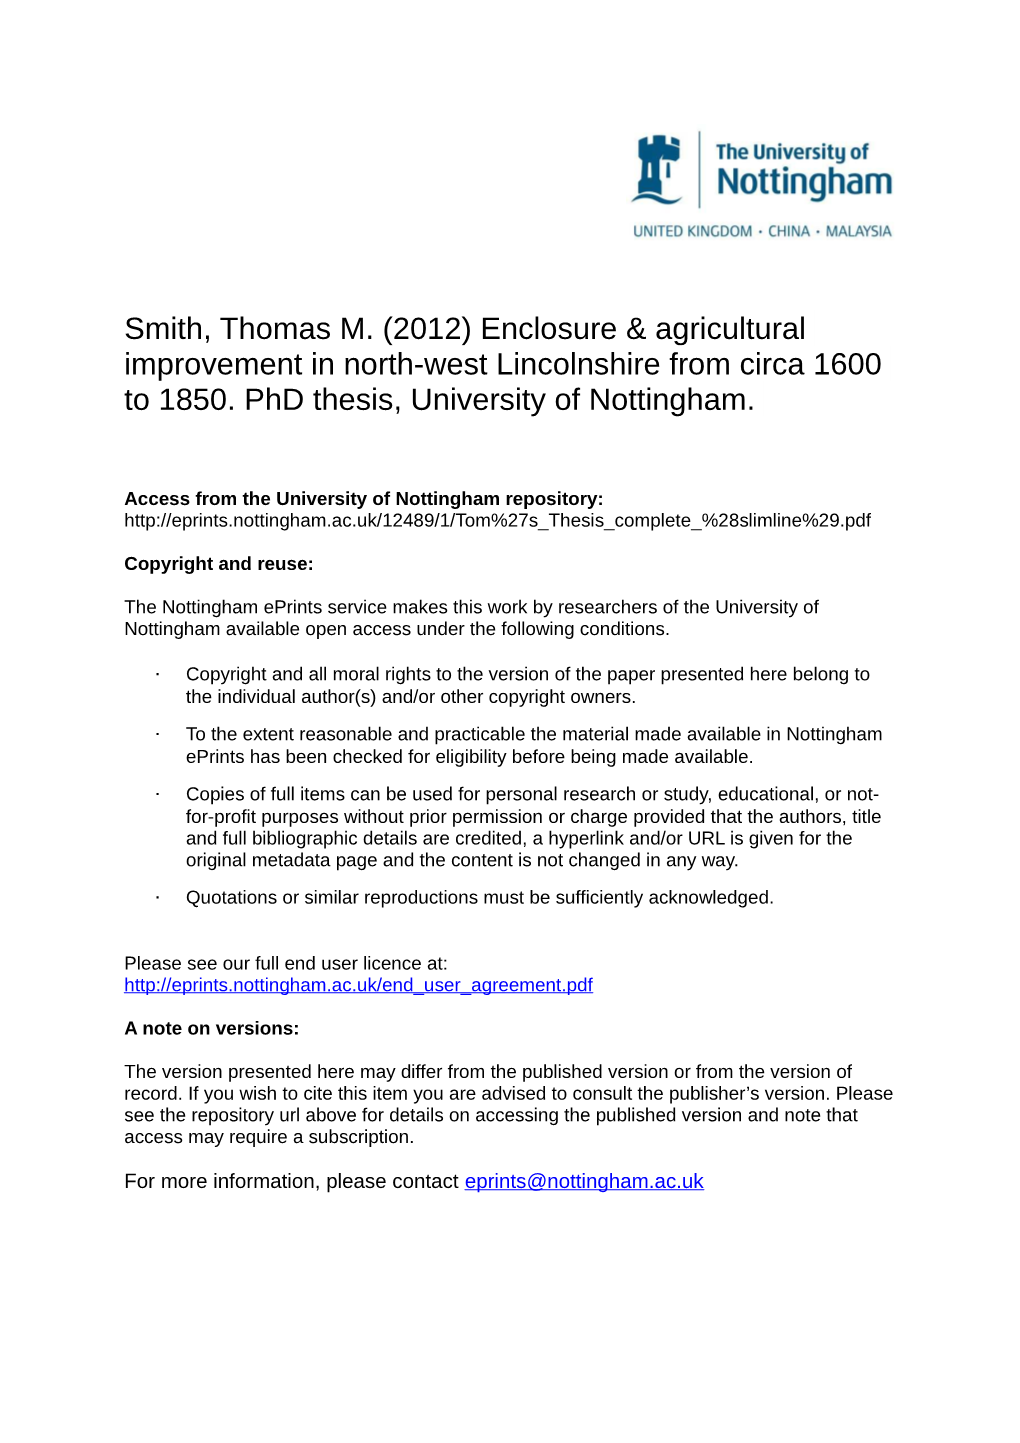 Smith, Thomas M. (2012) Enclosure & Agricultural Improvement In